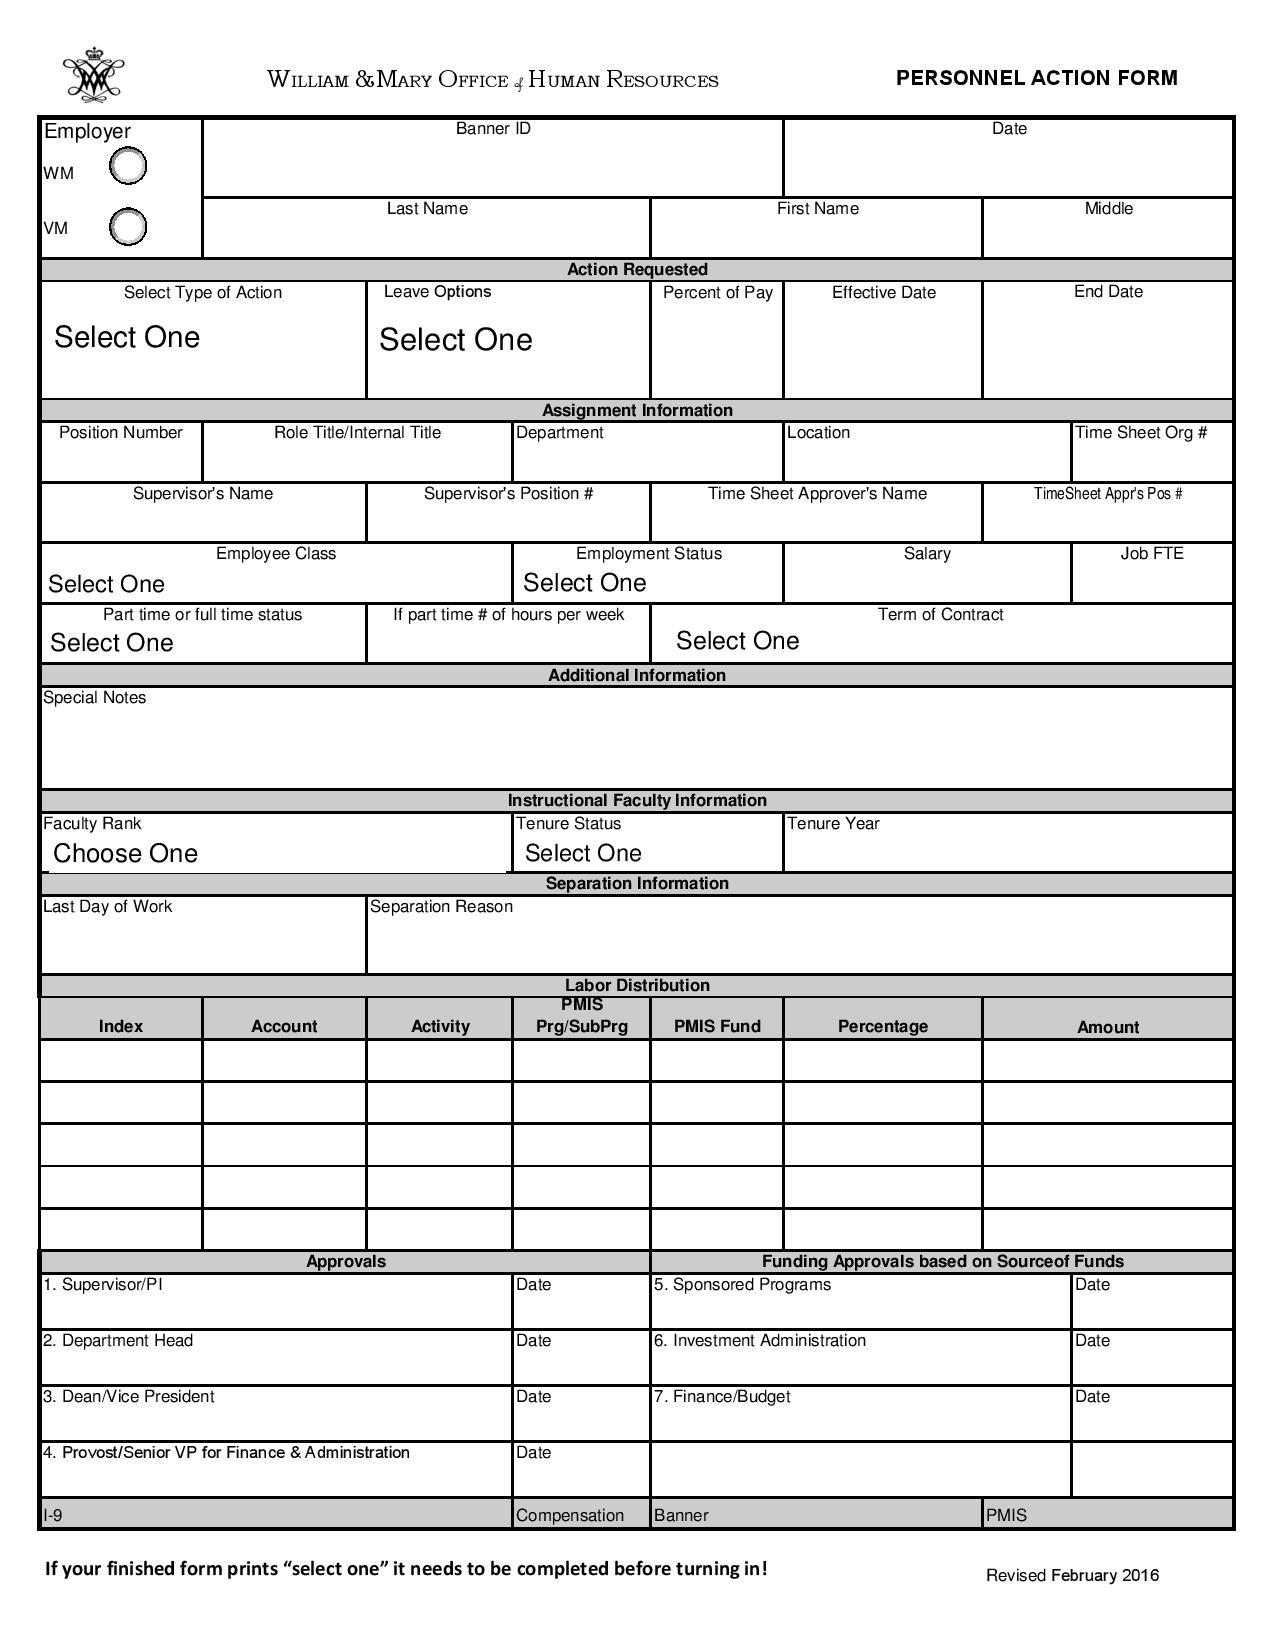 revised personnel action form page 001